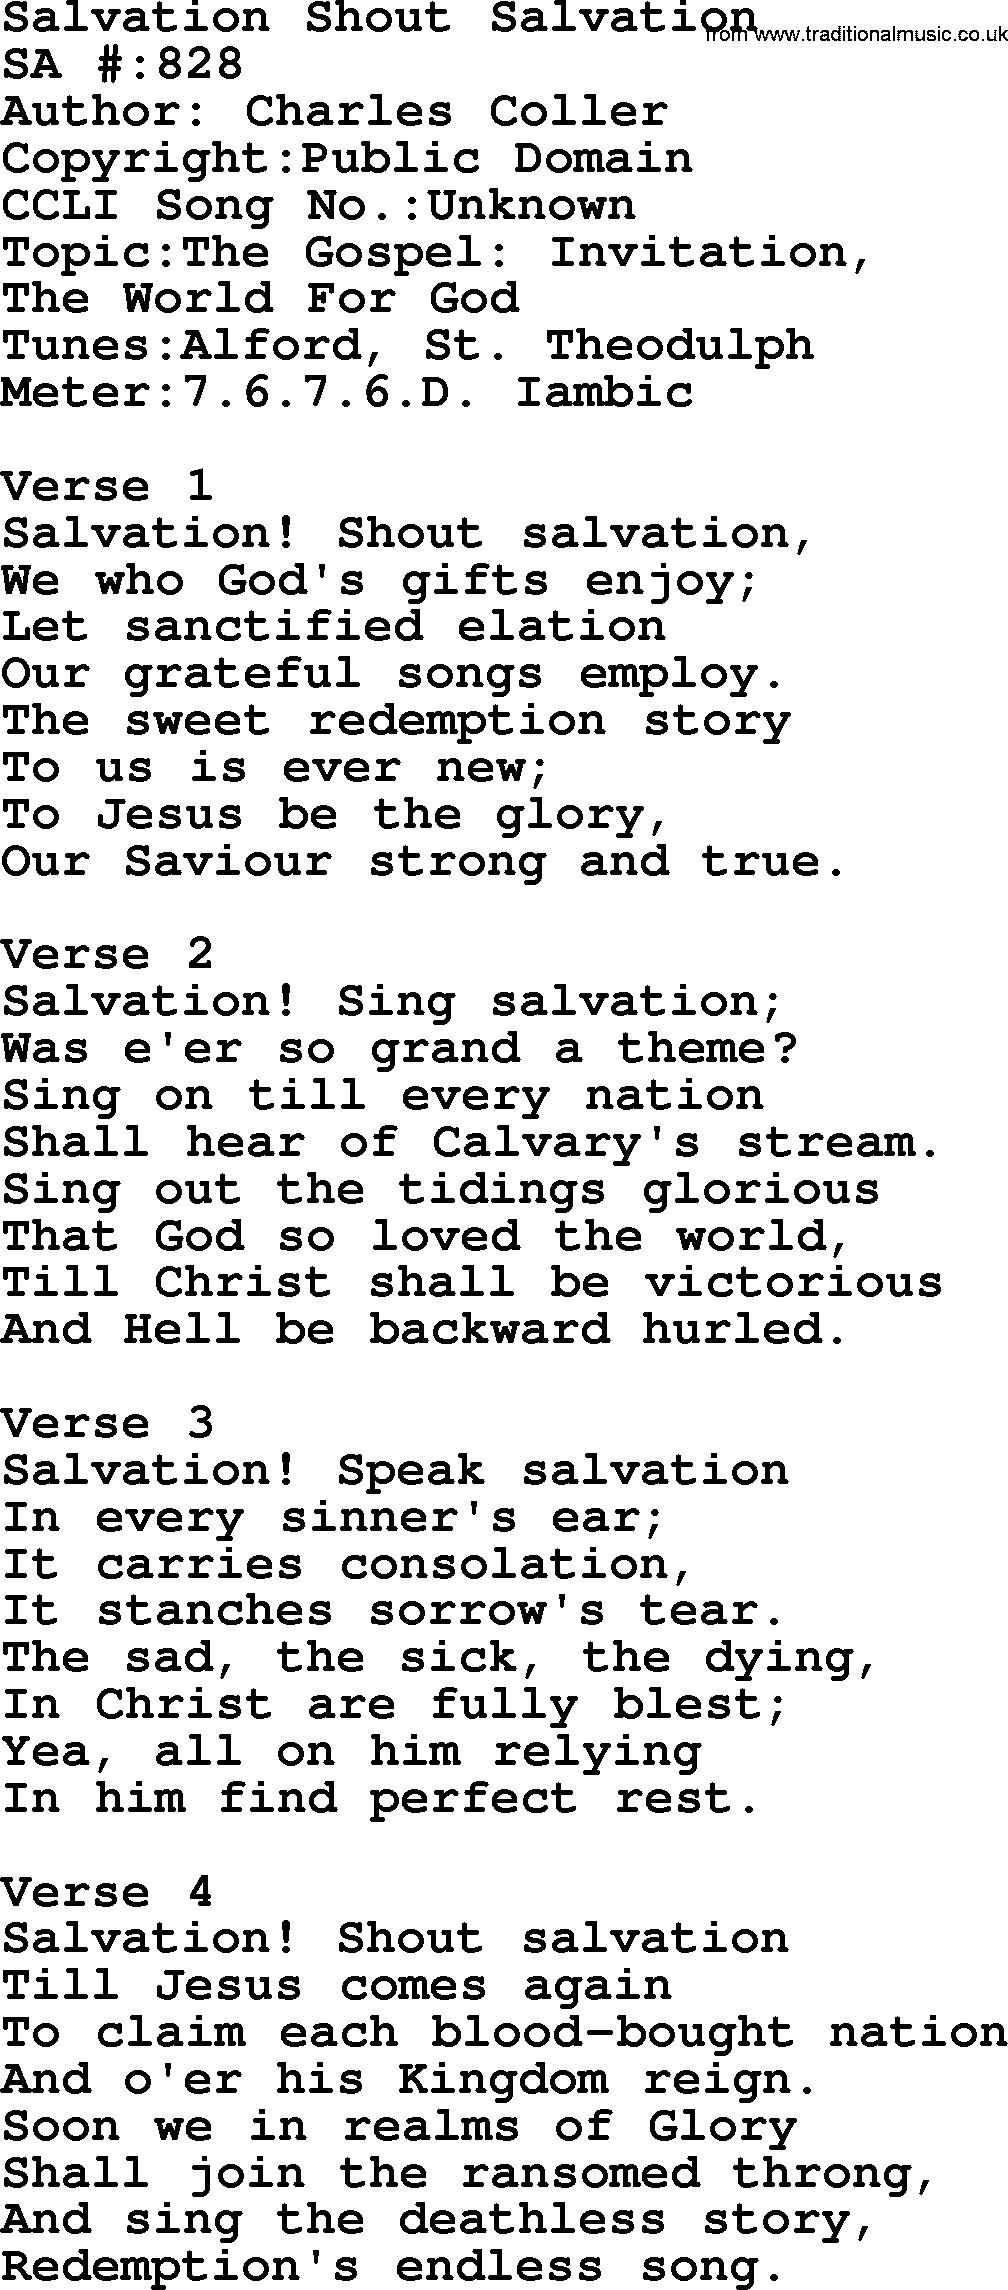 Salvation Army Hymnal, title: Salvation Shout Salvation, with lyrics and PDF,